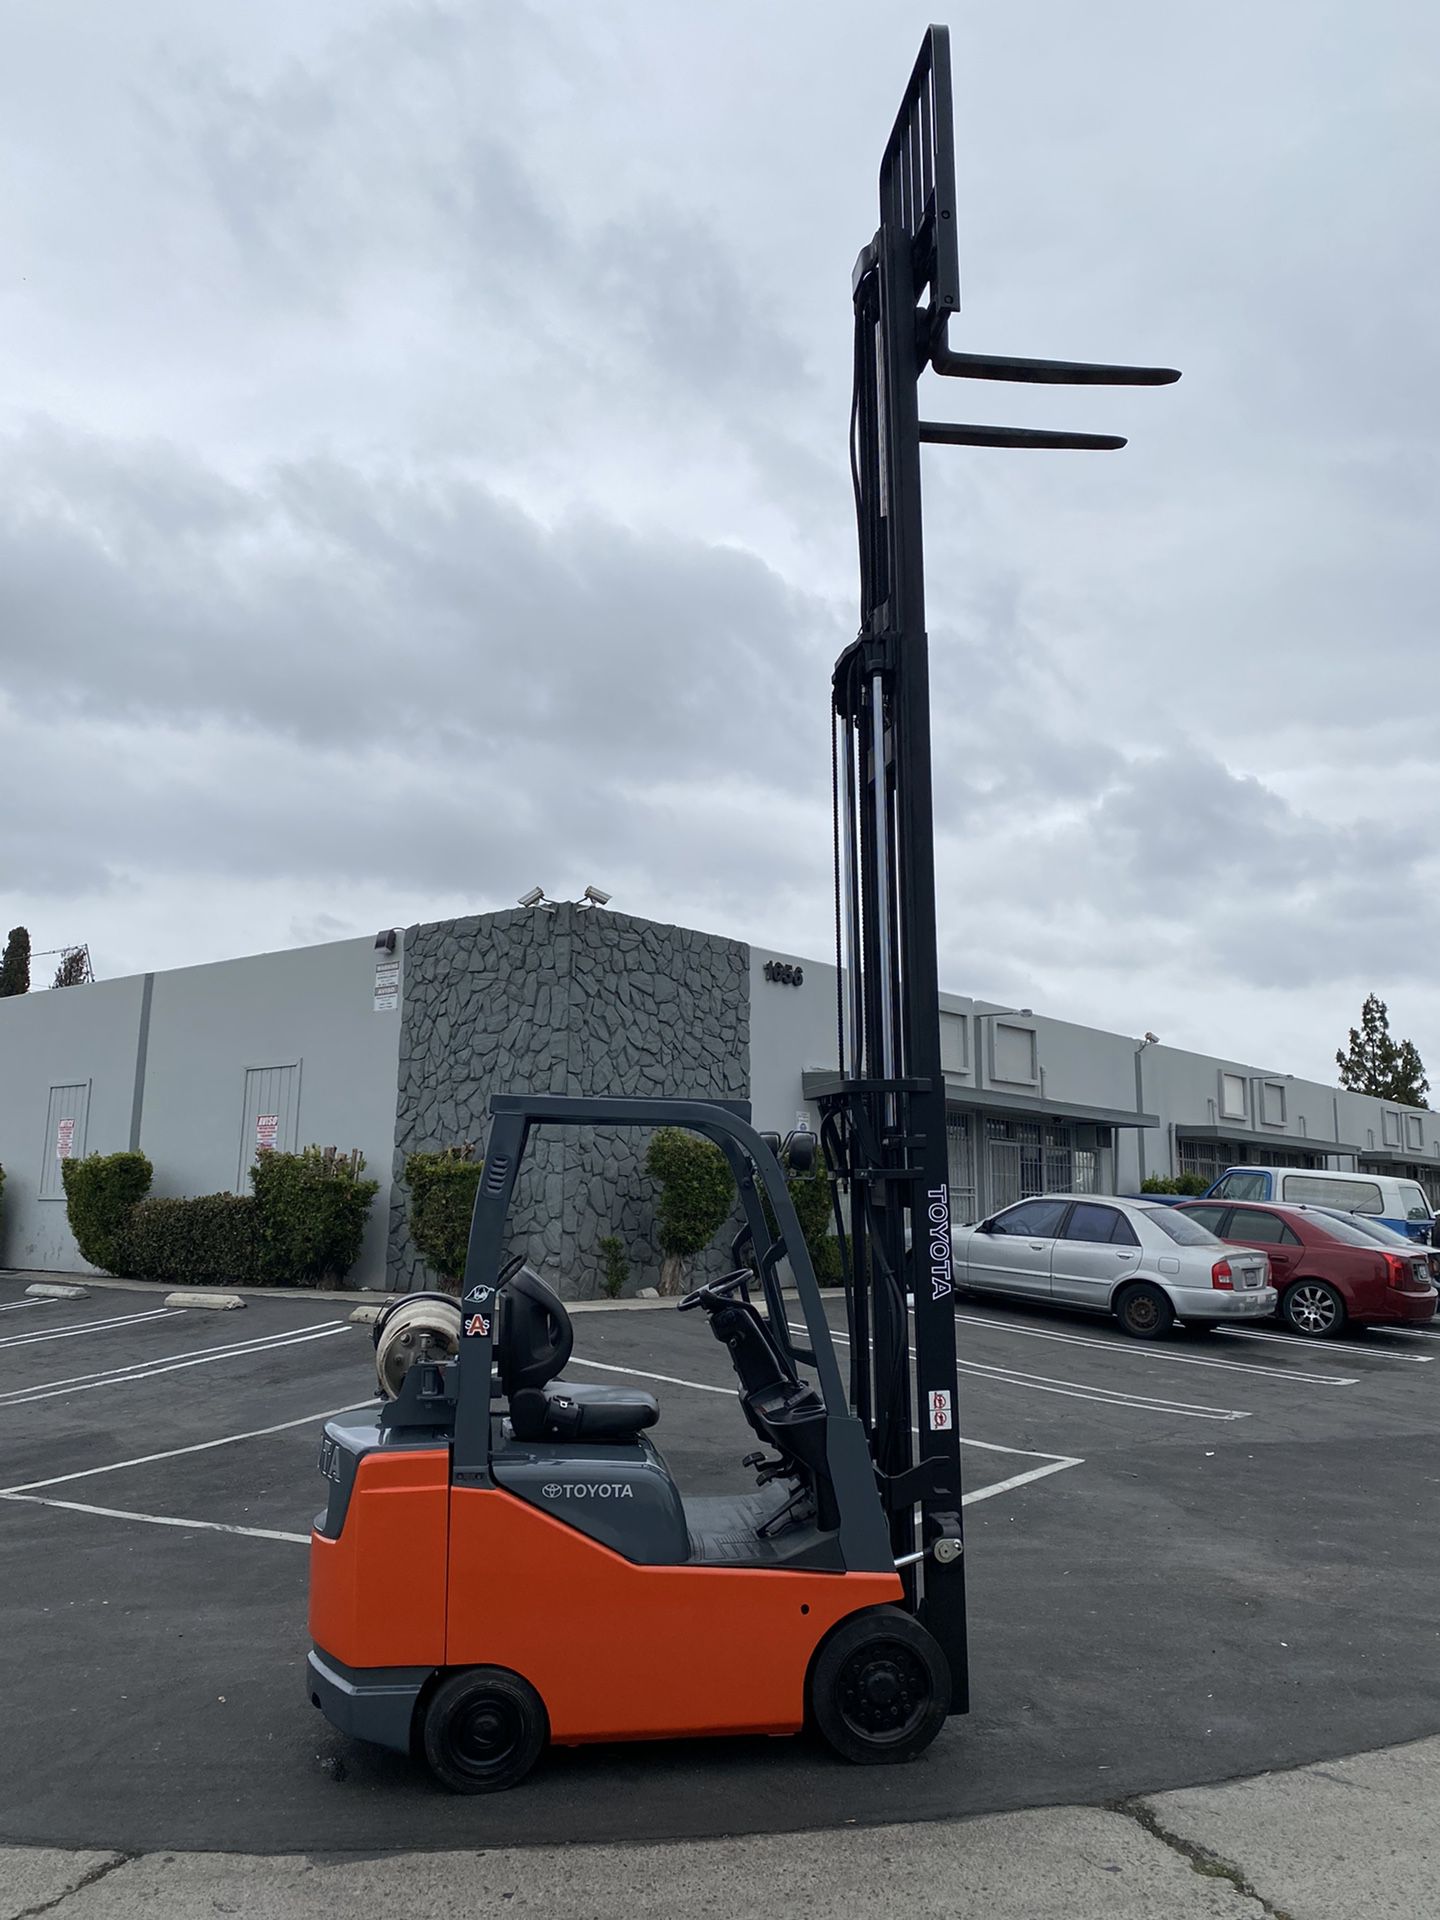 2014 Toyota Forklift 8FGCSU20 4000 LBS SMALL FRAME